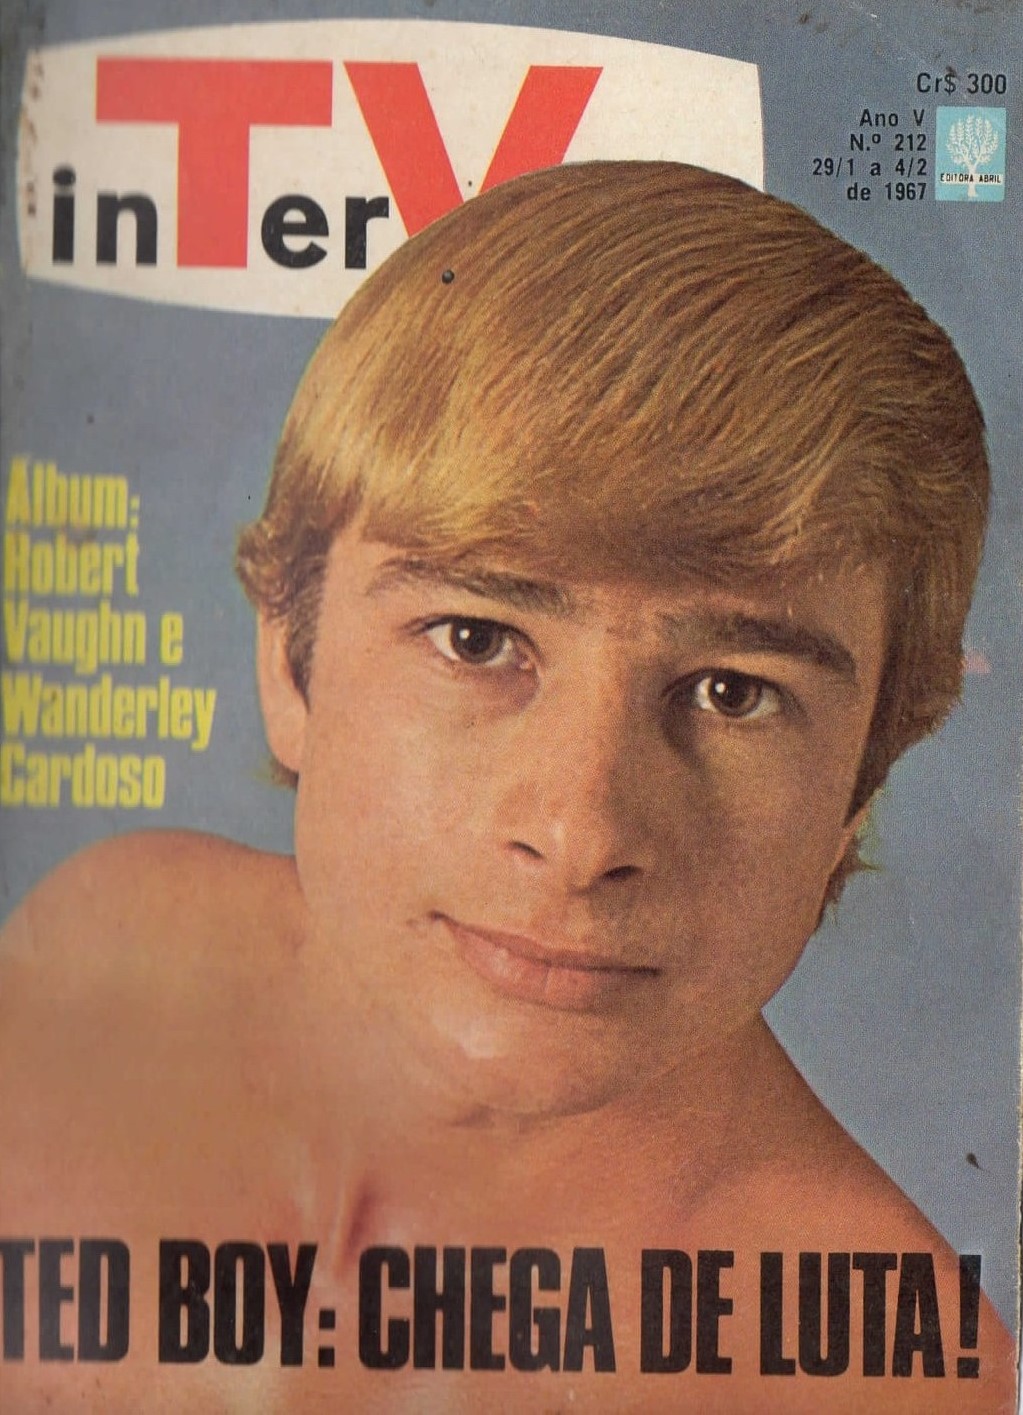 Ted Boy Marino on the cover of TV Intervalo in 1967.